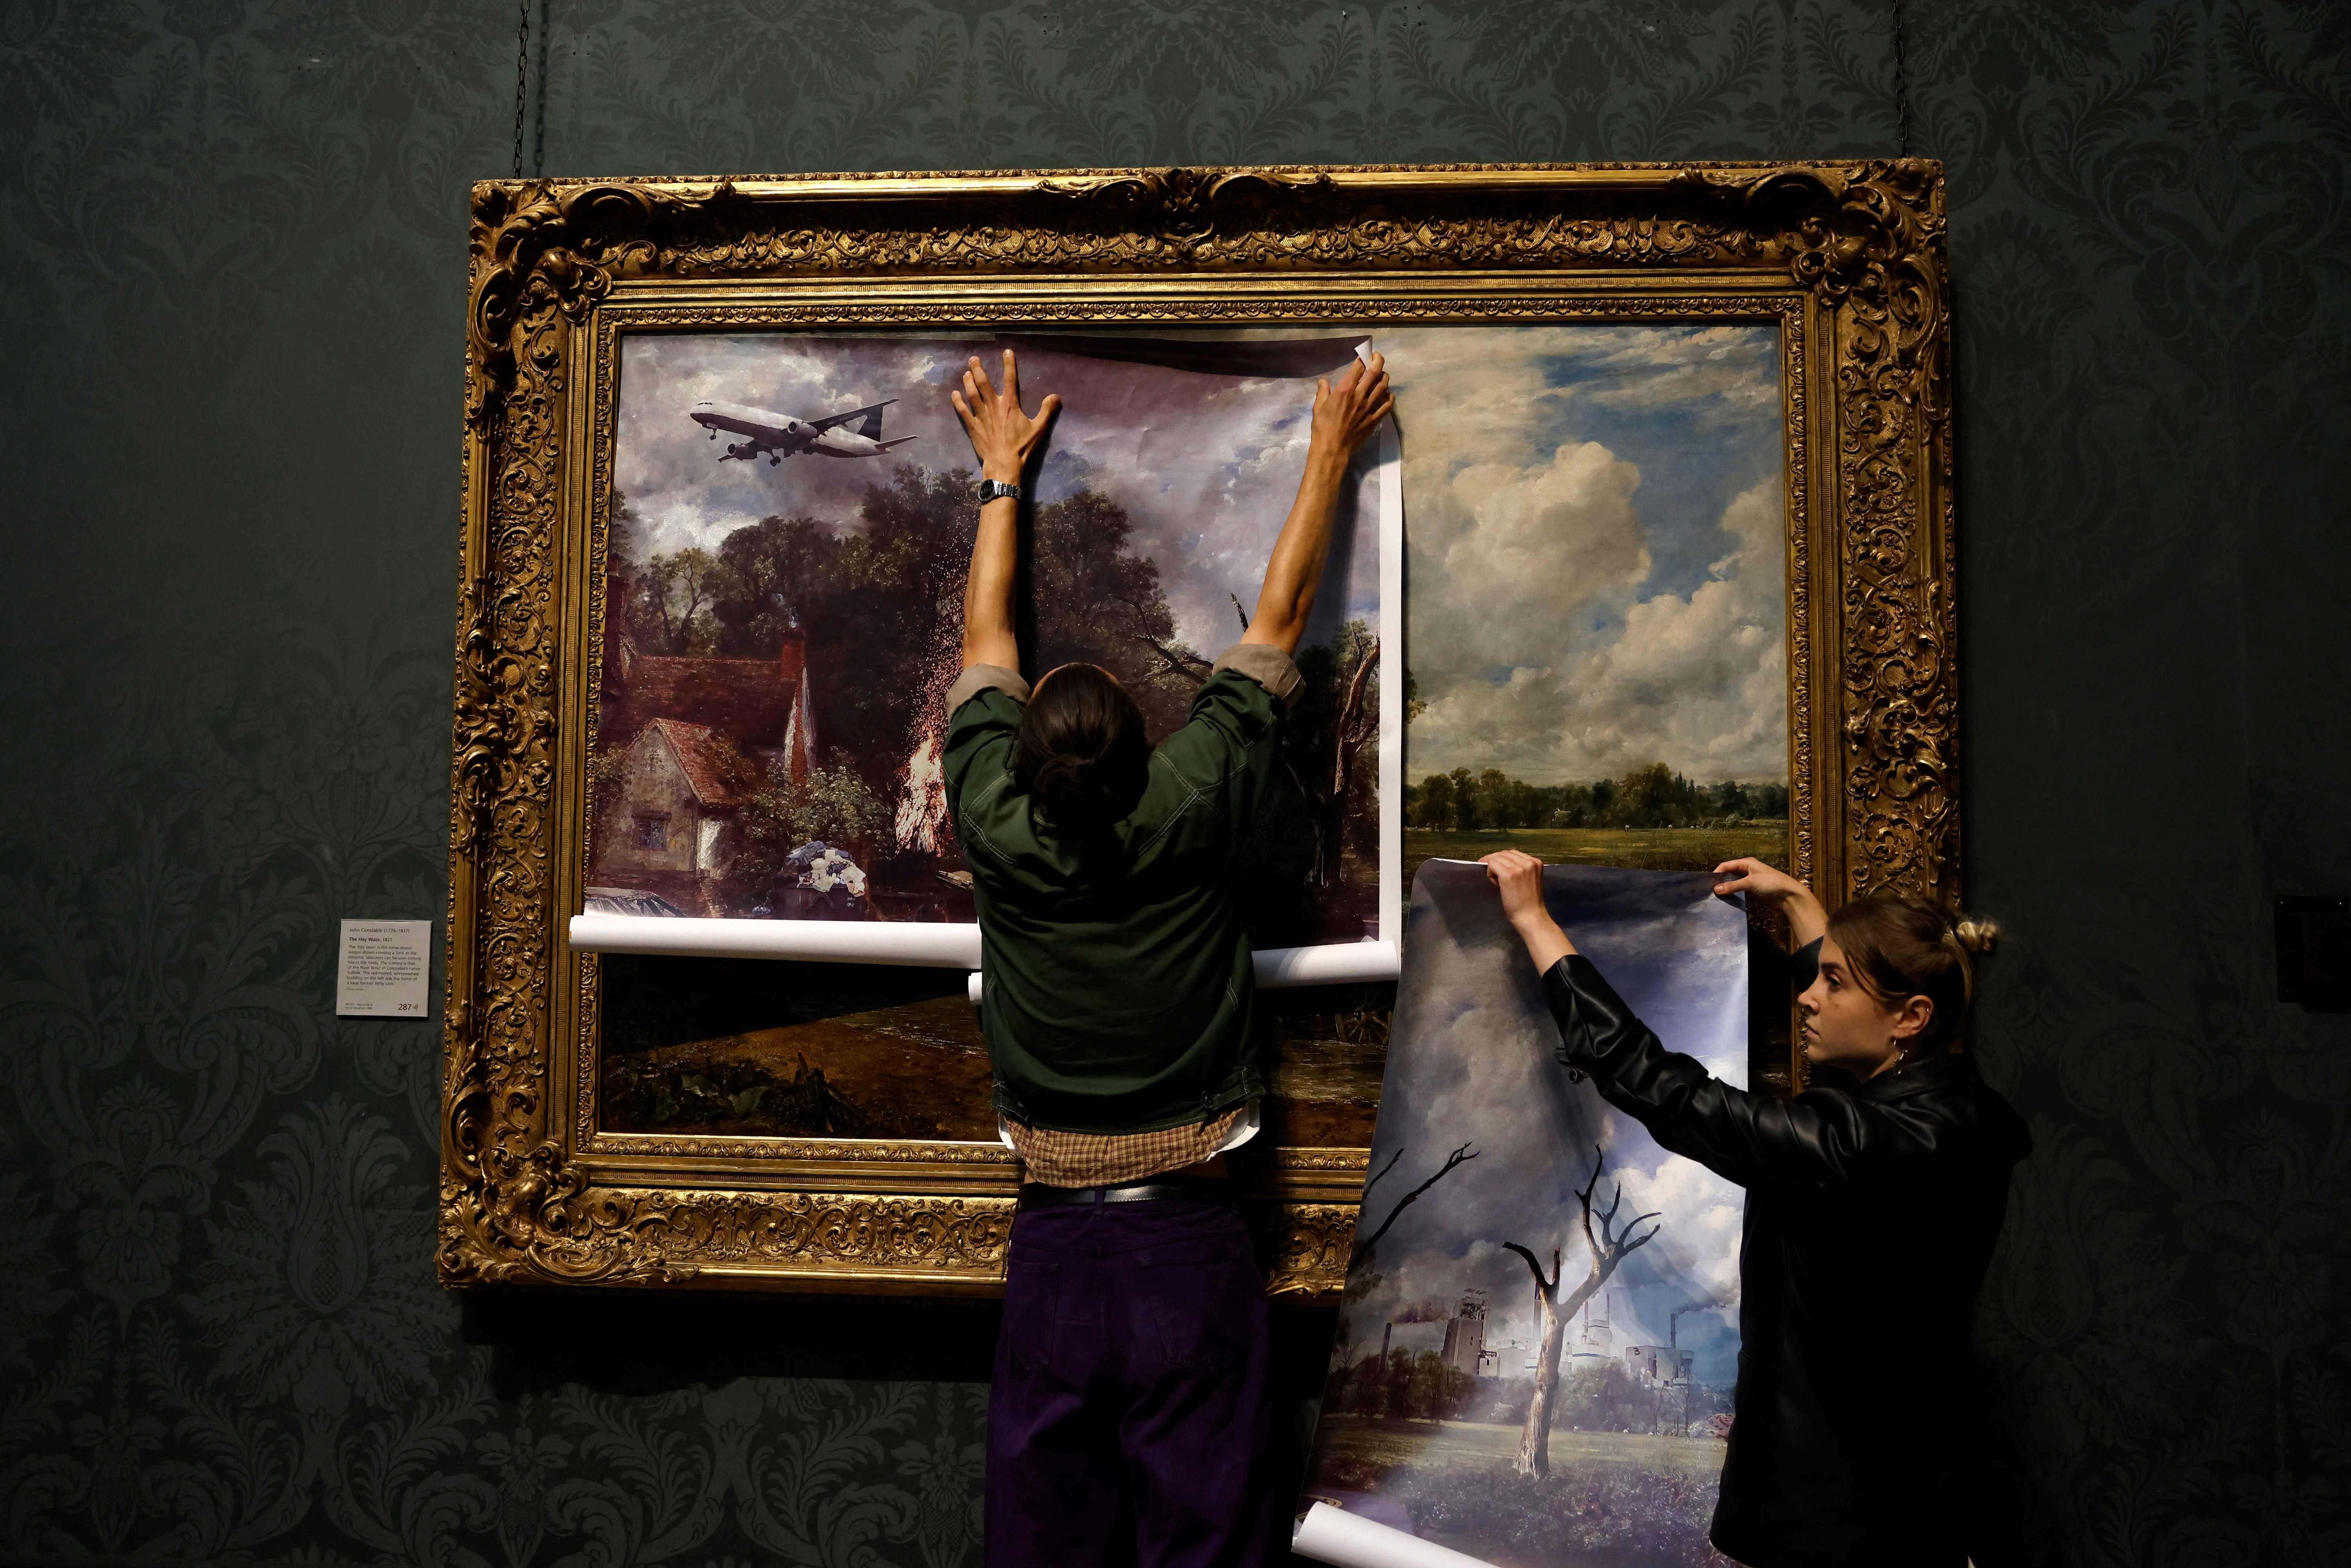 Activists from the 'Just Stop Oil' campaign group cover 'The Hay Wain' painting by English artist John Constable